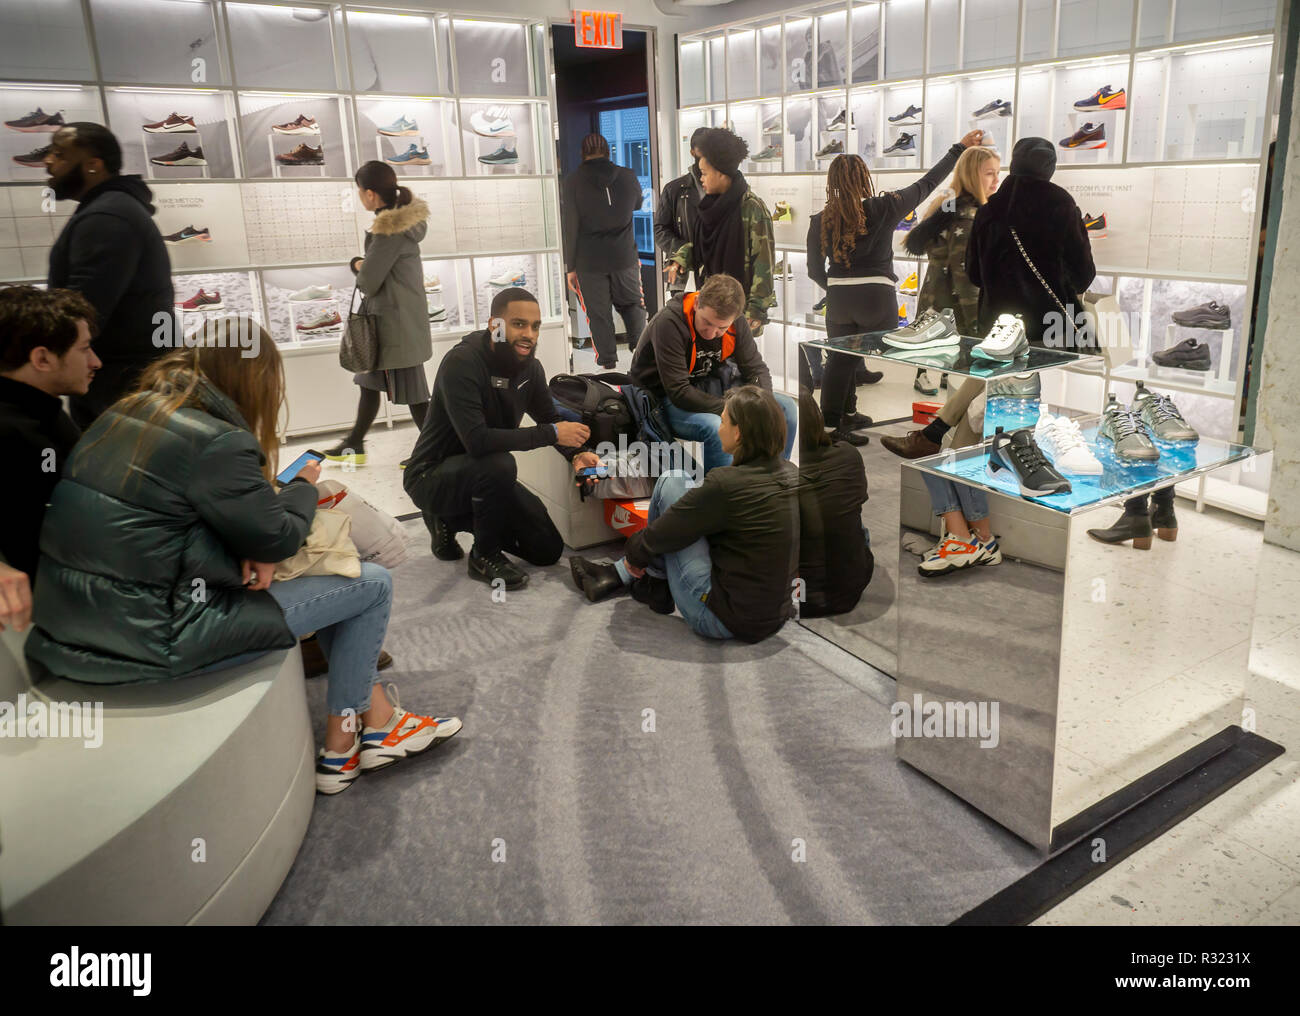 Shoppers try on sneakers in the newly opened Nike flagship store on Fifth  avenue in New York on Saturday, November 17, 2018. The 69,000 square foot  store, dubbed the "House of Innovation